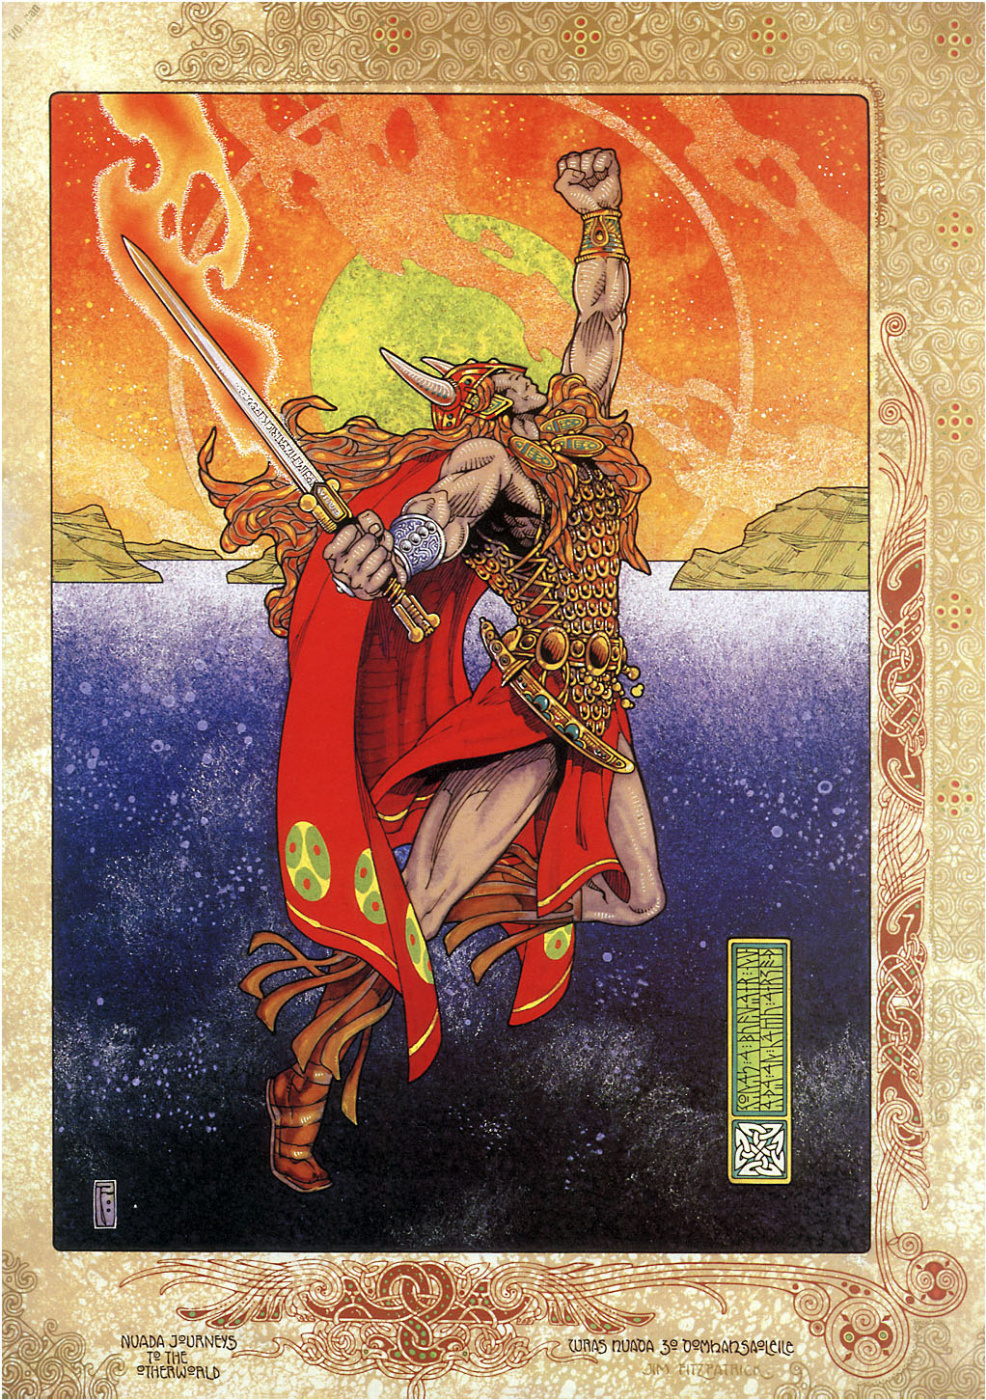 Jim Fitzpatrick. Journey to Another World